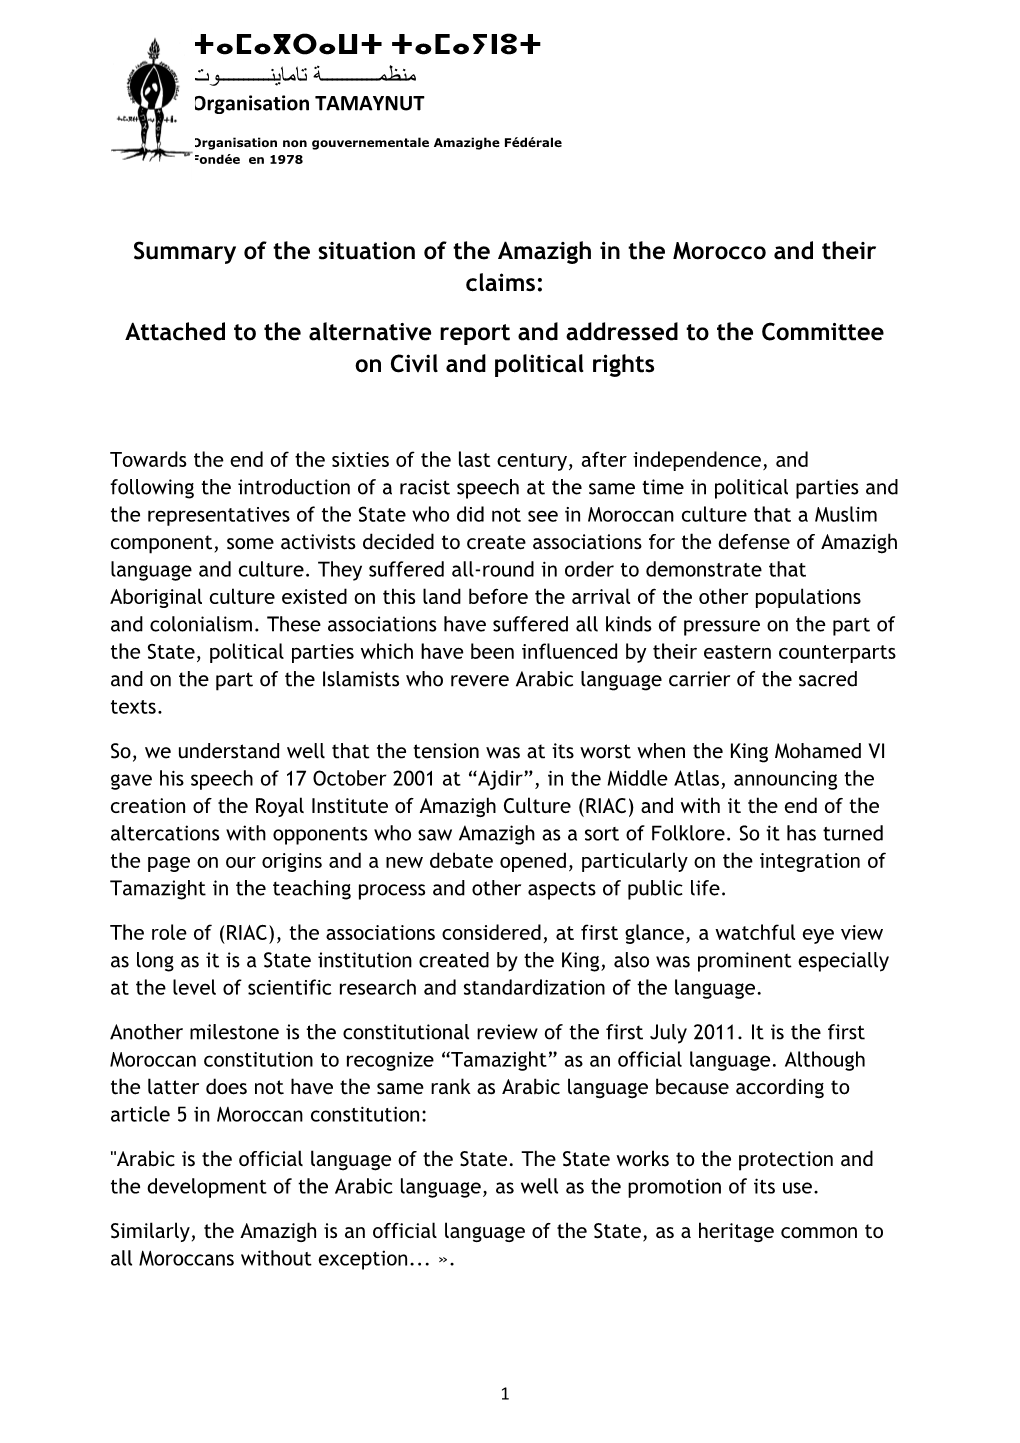 Summary of the Situation of the Amazigh in the Morocco and Their Claims